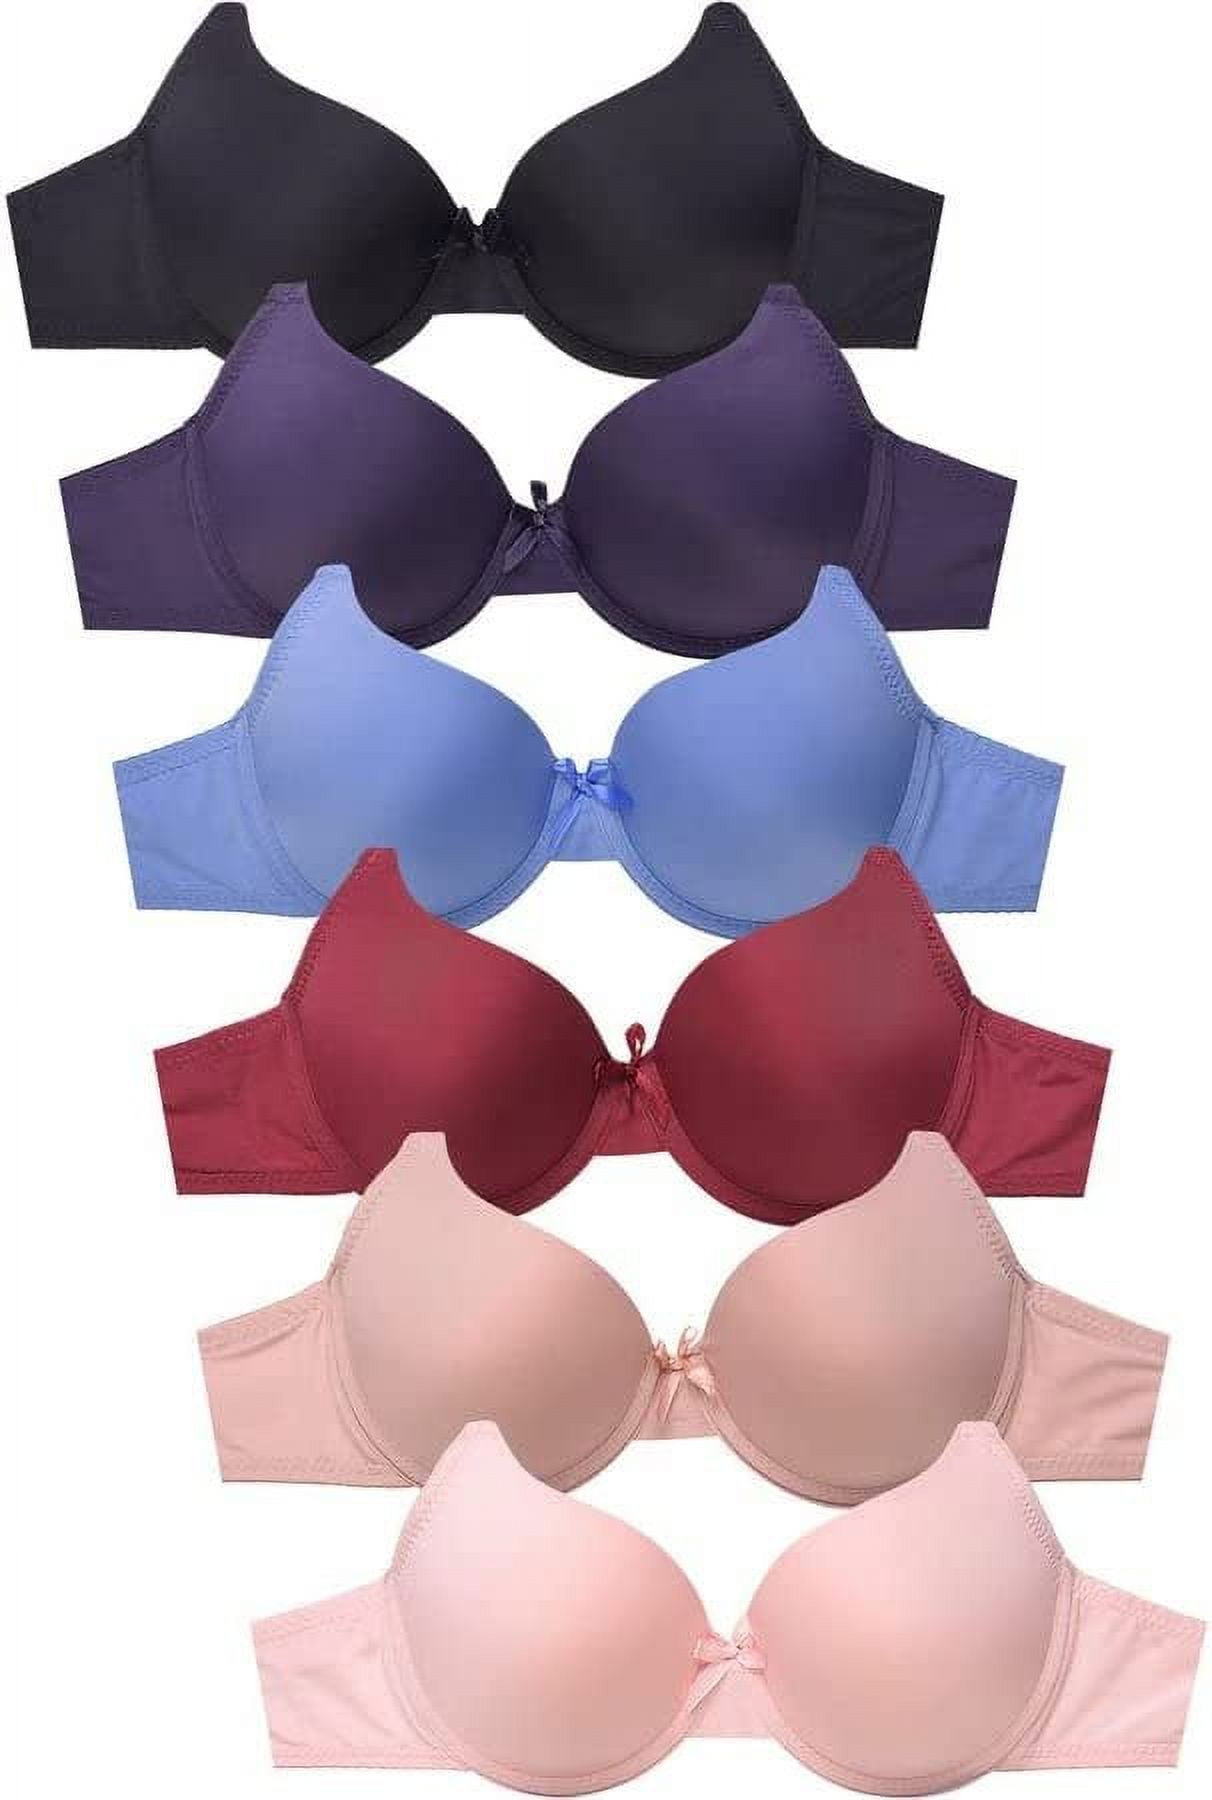 Mamia Women's Basic Lace/Plain Lace Bras Pack of 6- Various Styles 43035,  36B 